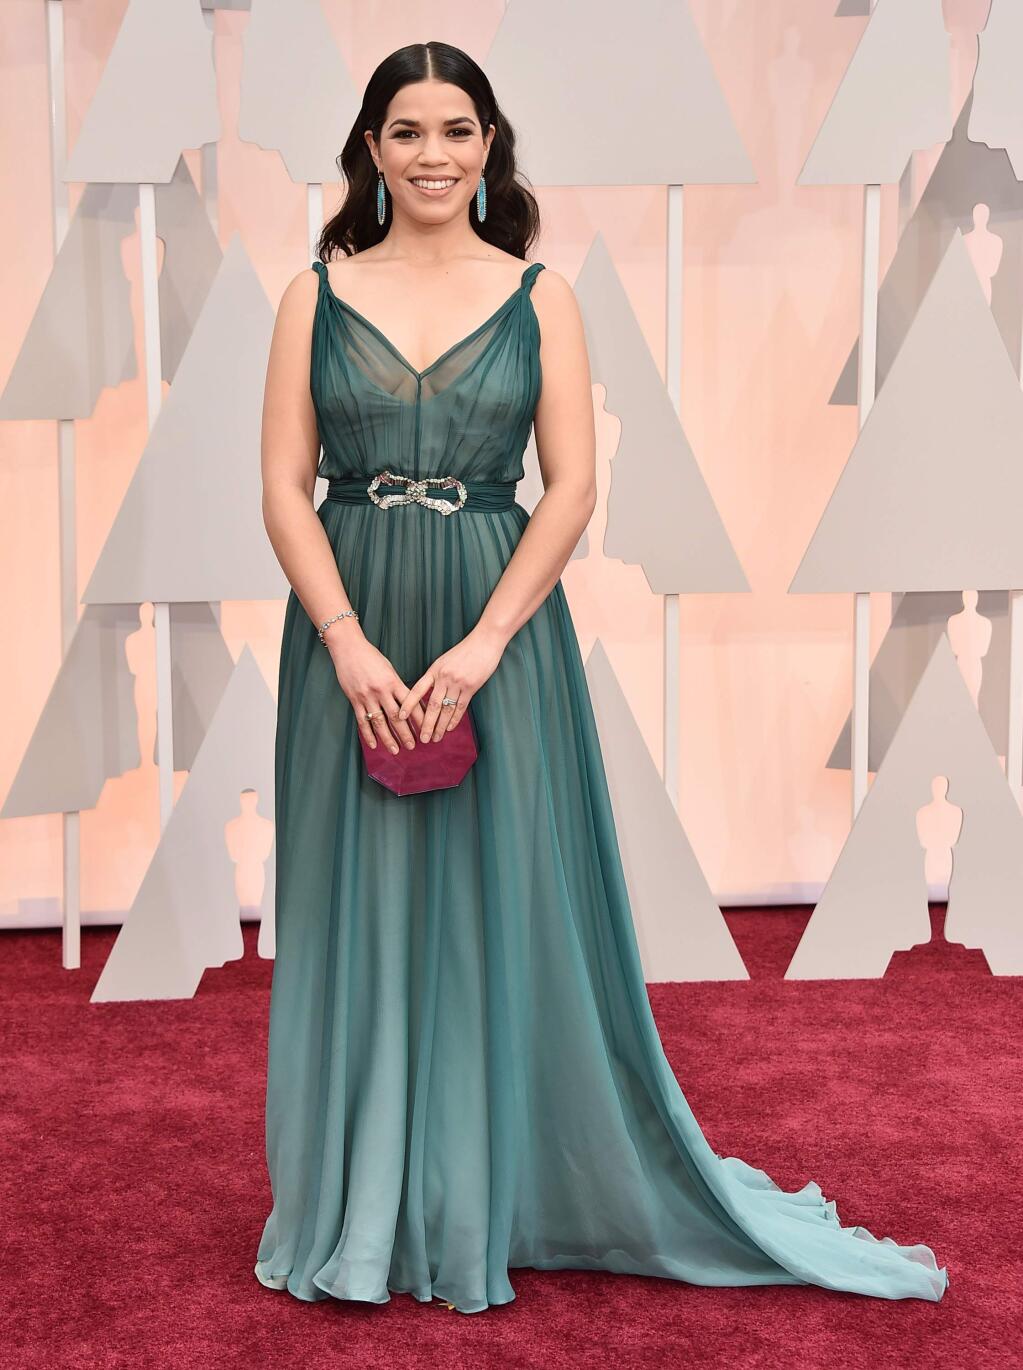 America Ferrera arrives at the Oscars on Sunday, Feb. 22, 2015, at the Dolby Theatre in Los Angeles. (Photo by Jordan Strauss/Invision/AP)